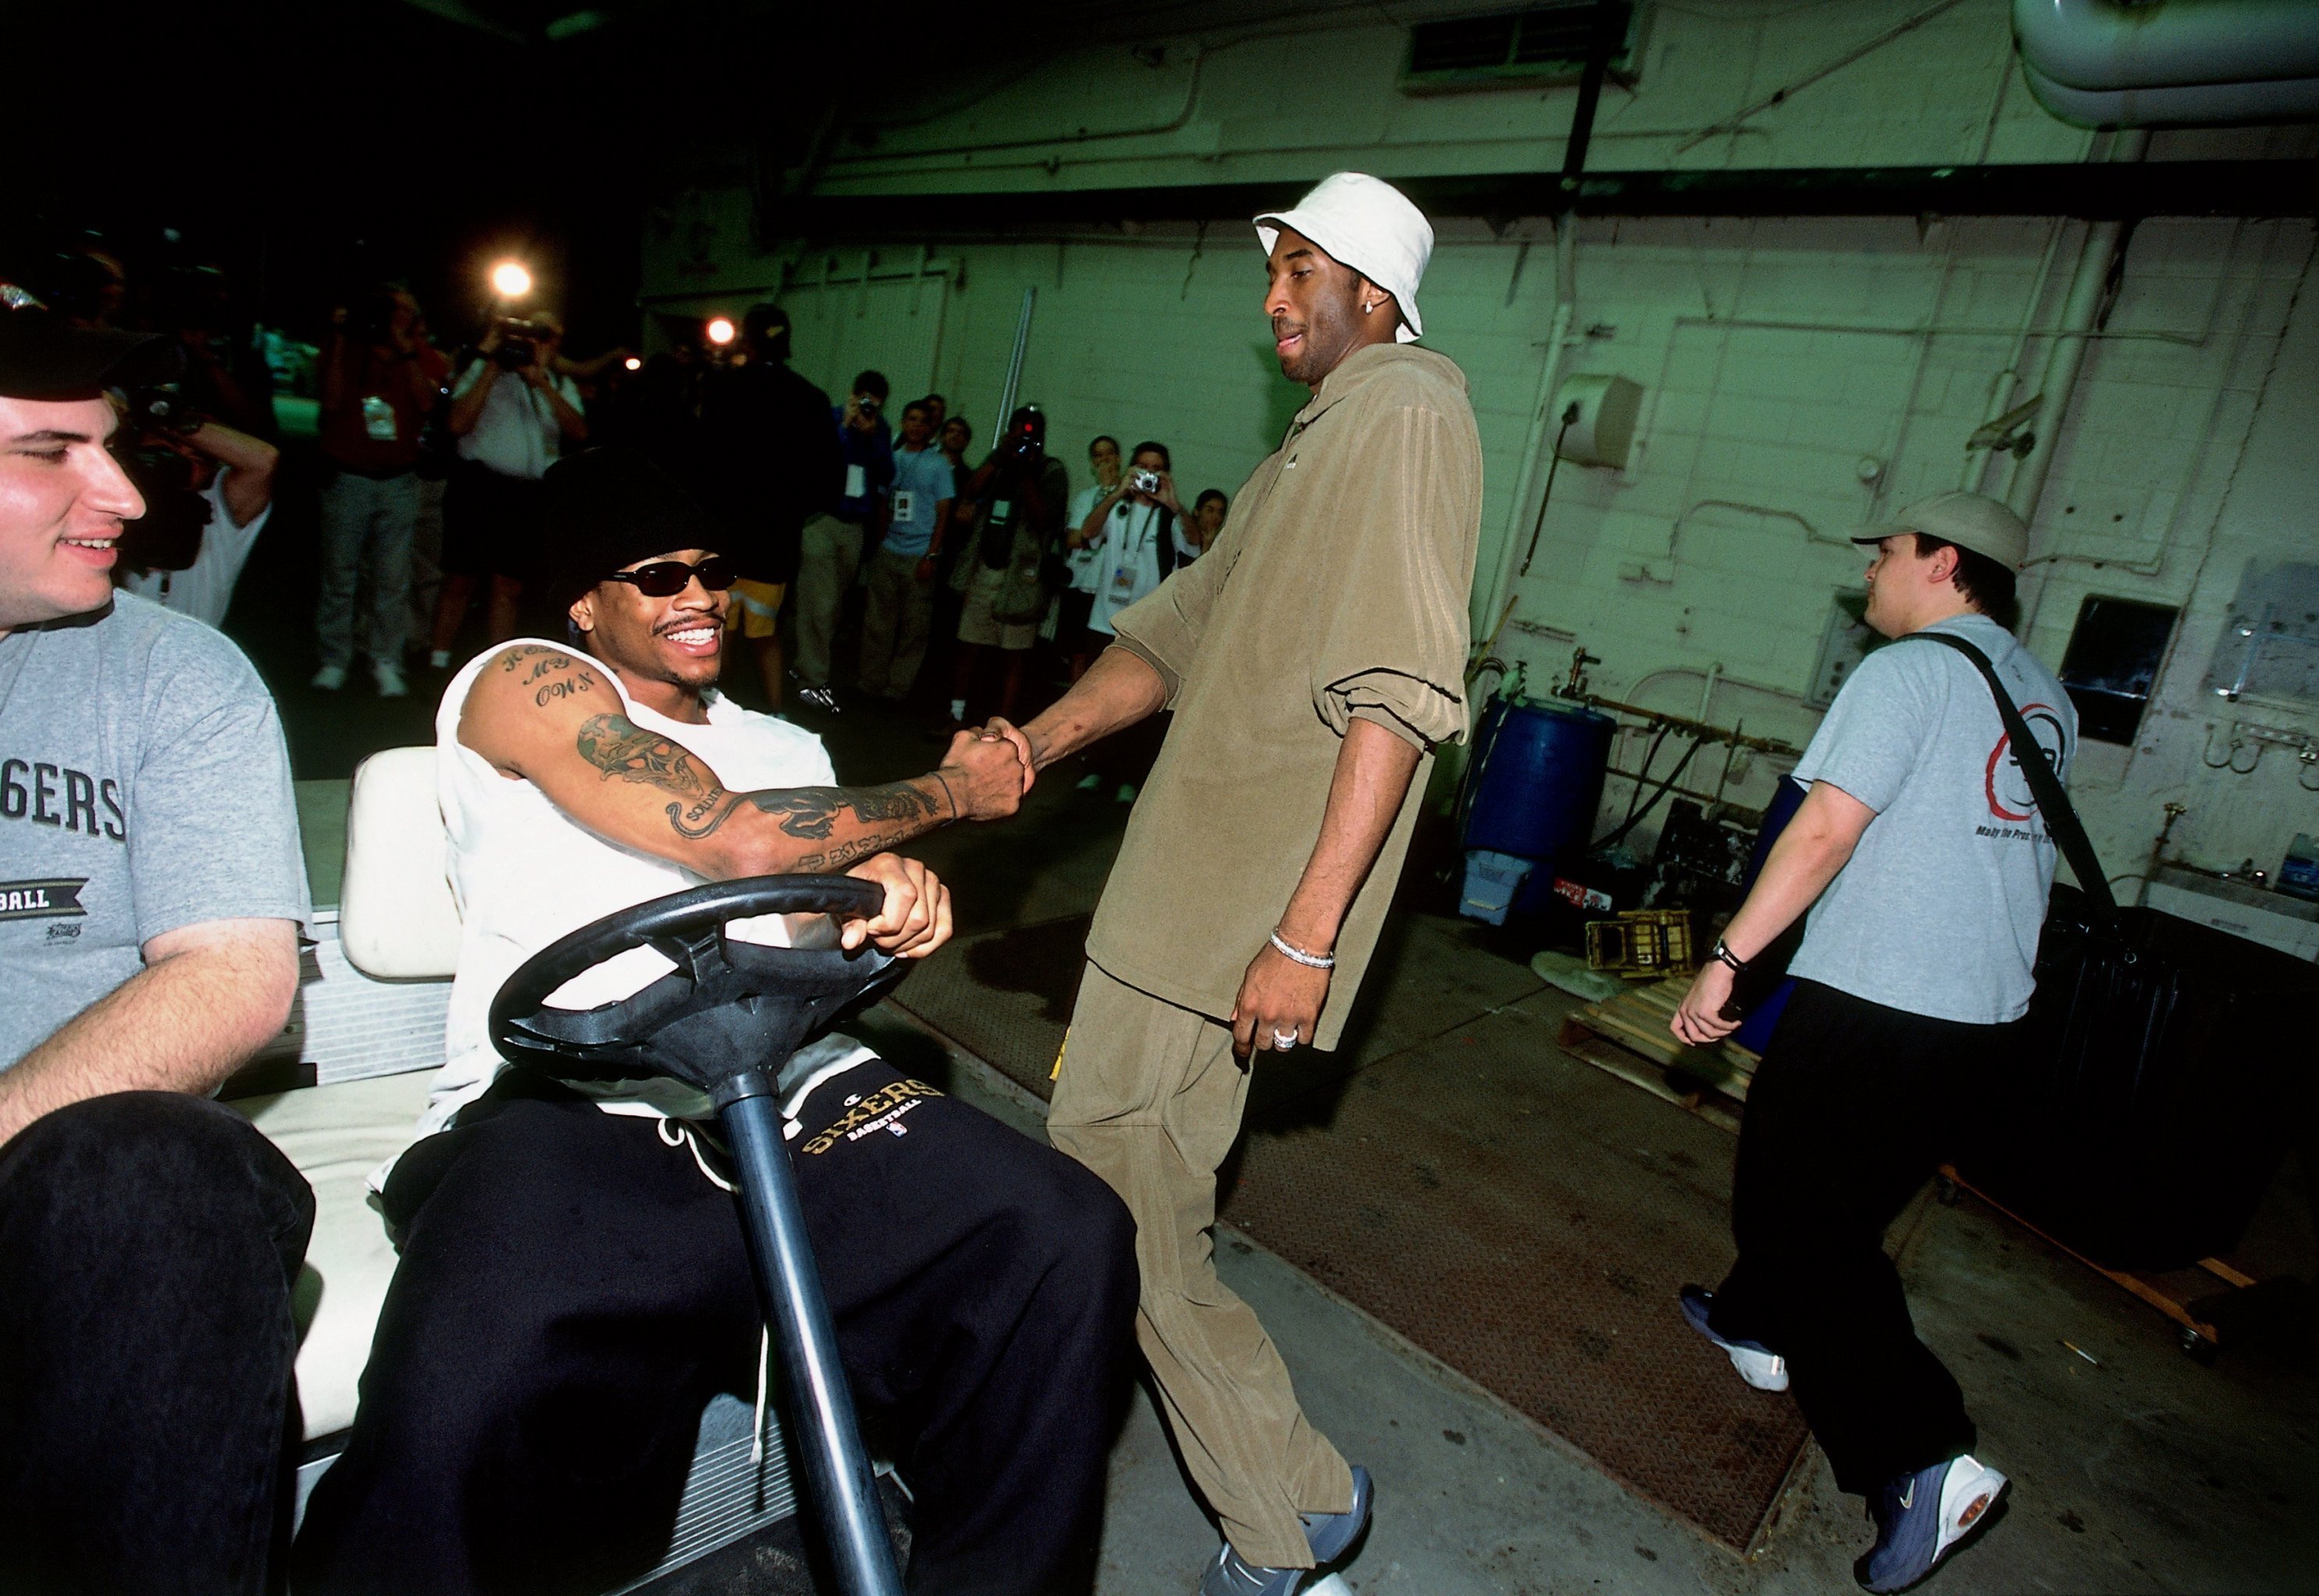 ThrowbackHoops  Allen iverson, Hip hop fashion, Mens outfits